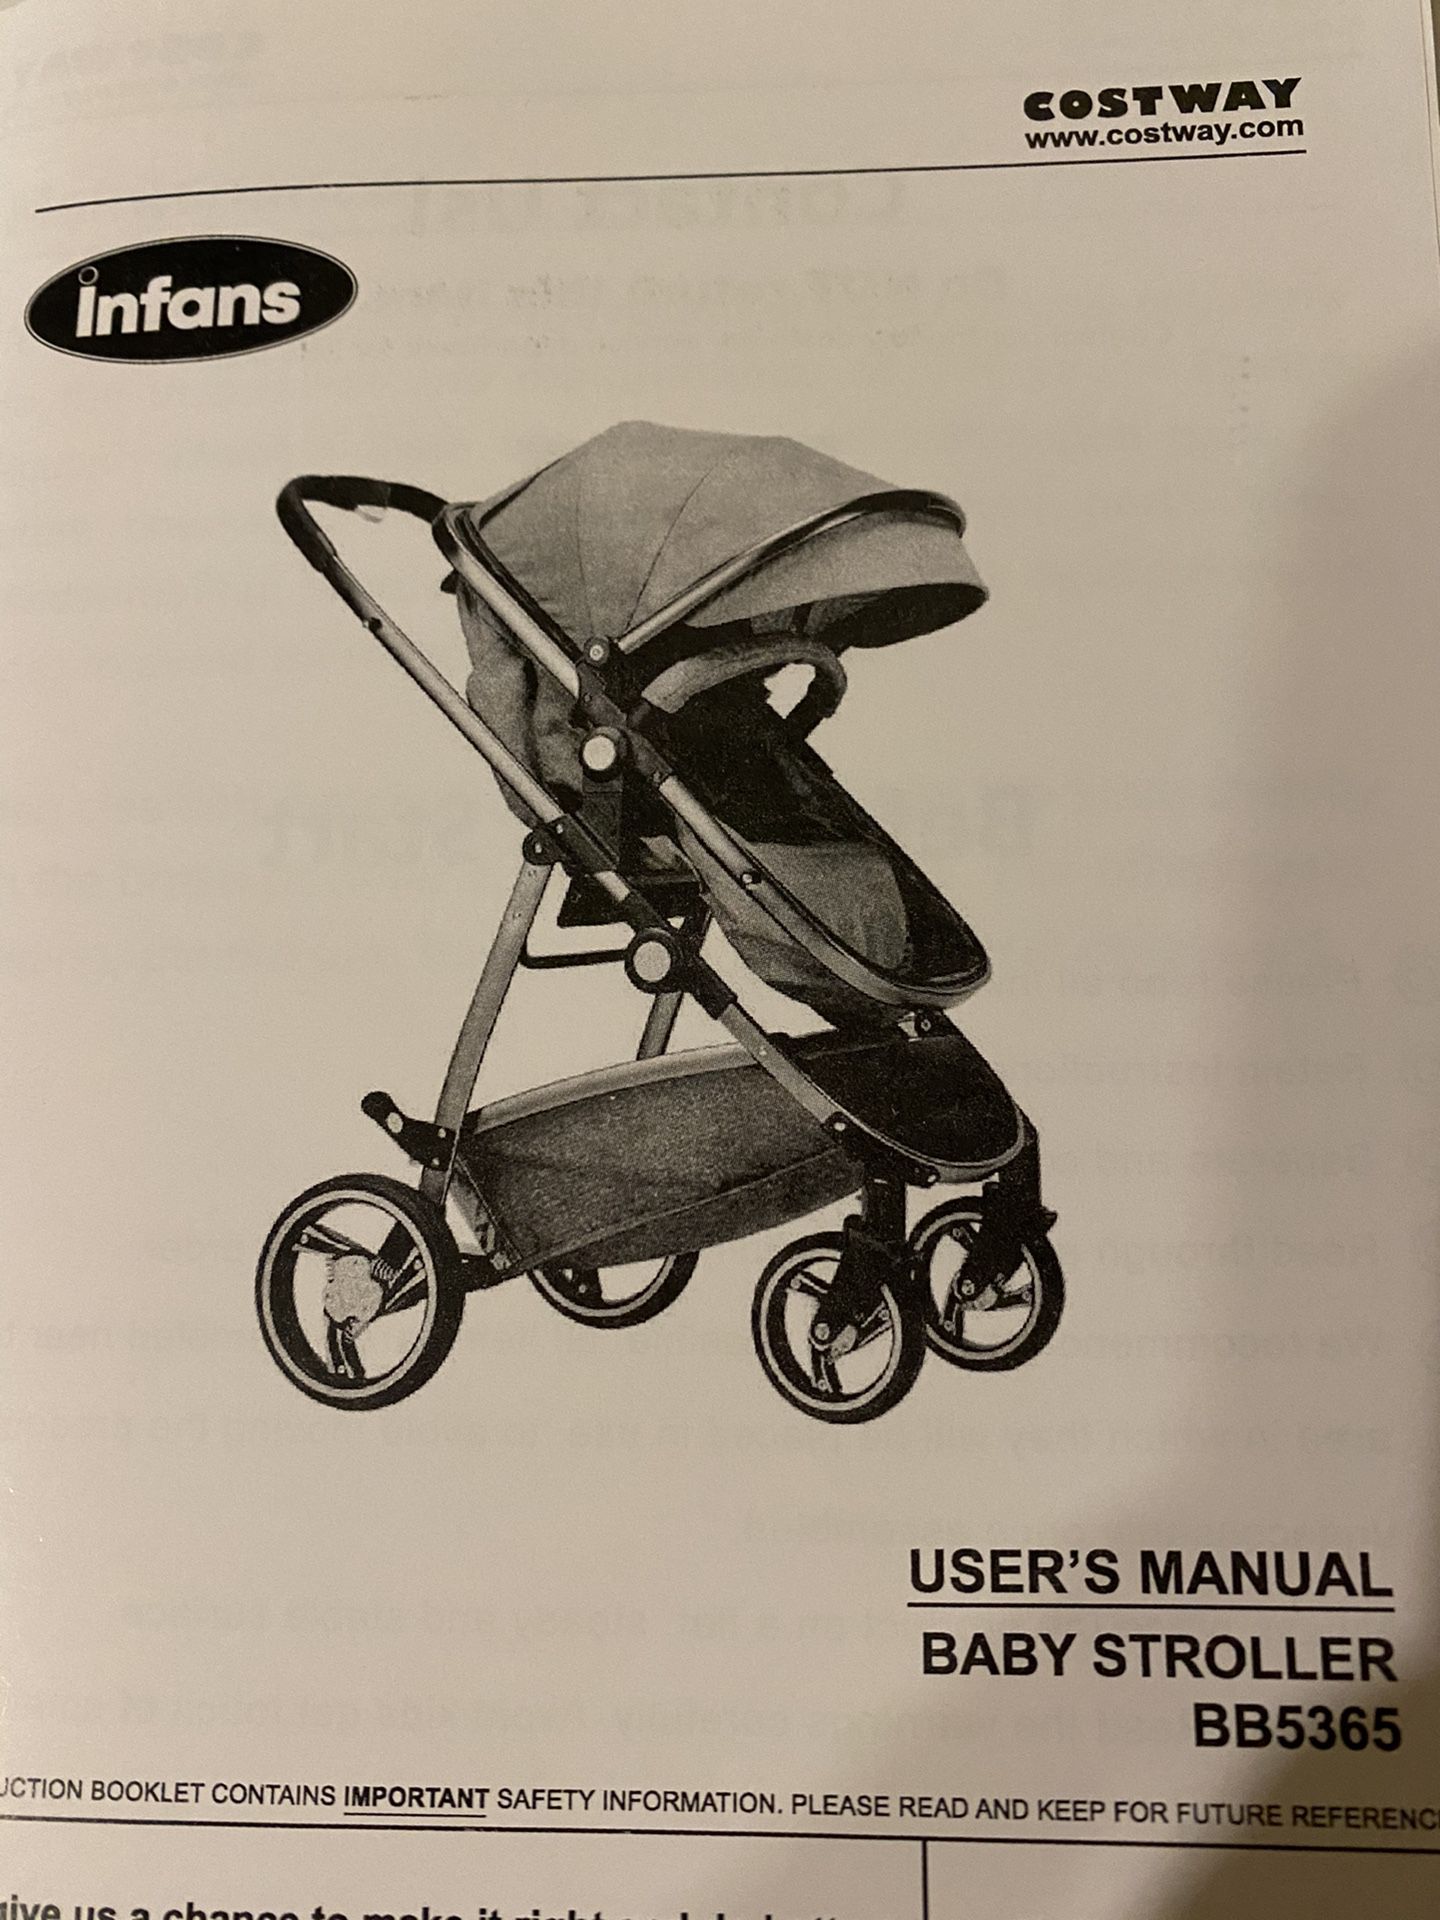 Infans Costway Baby Stroller NEW- Black And Gray